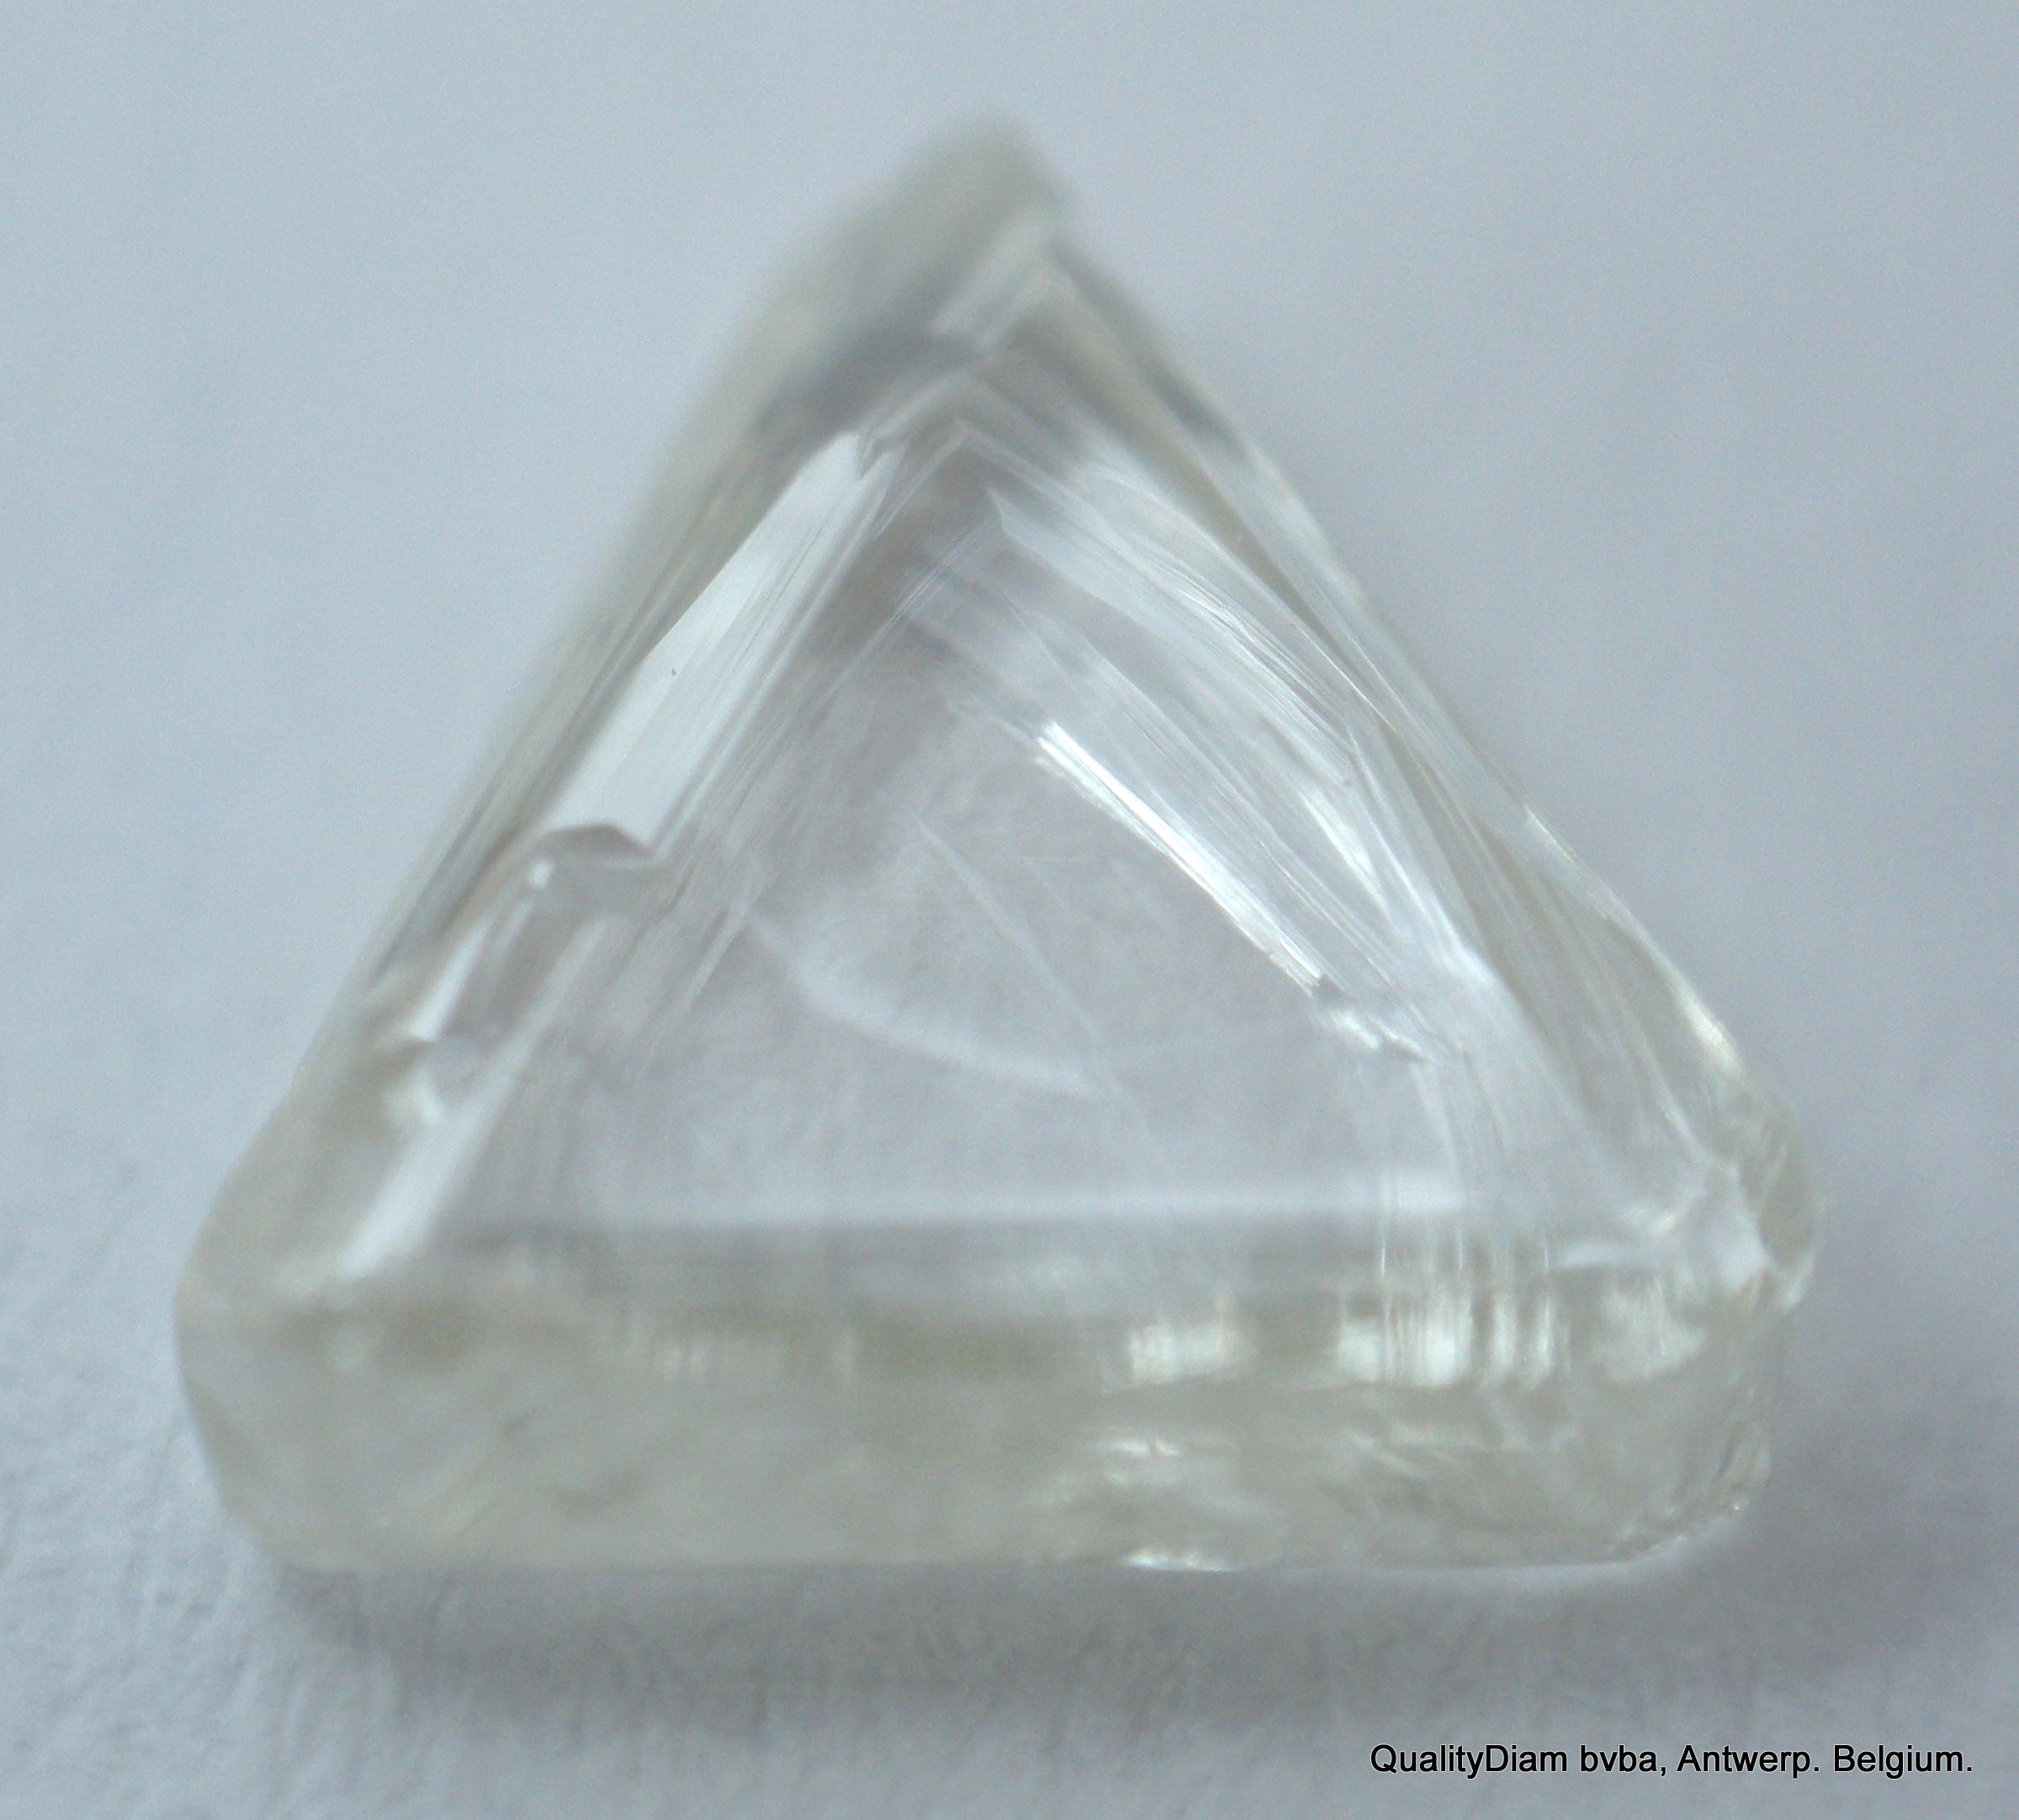 H Vs1 0.53 Carat Triangle Shape Rough Diamond Recently Mined Out Uncut Gemstone